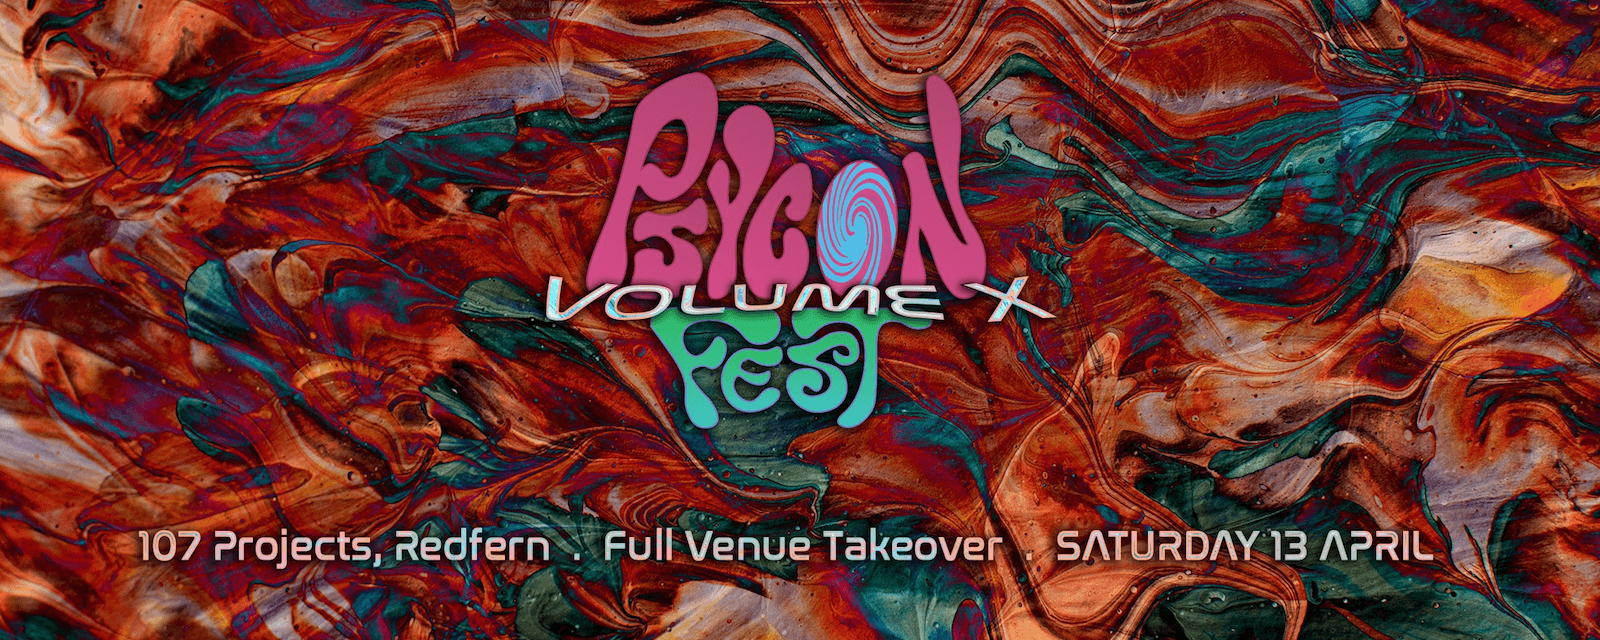 PsyconFest : The Festival Celebrating Its 10th Edition